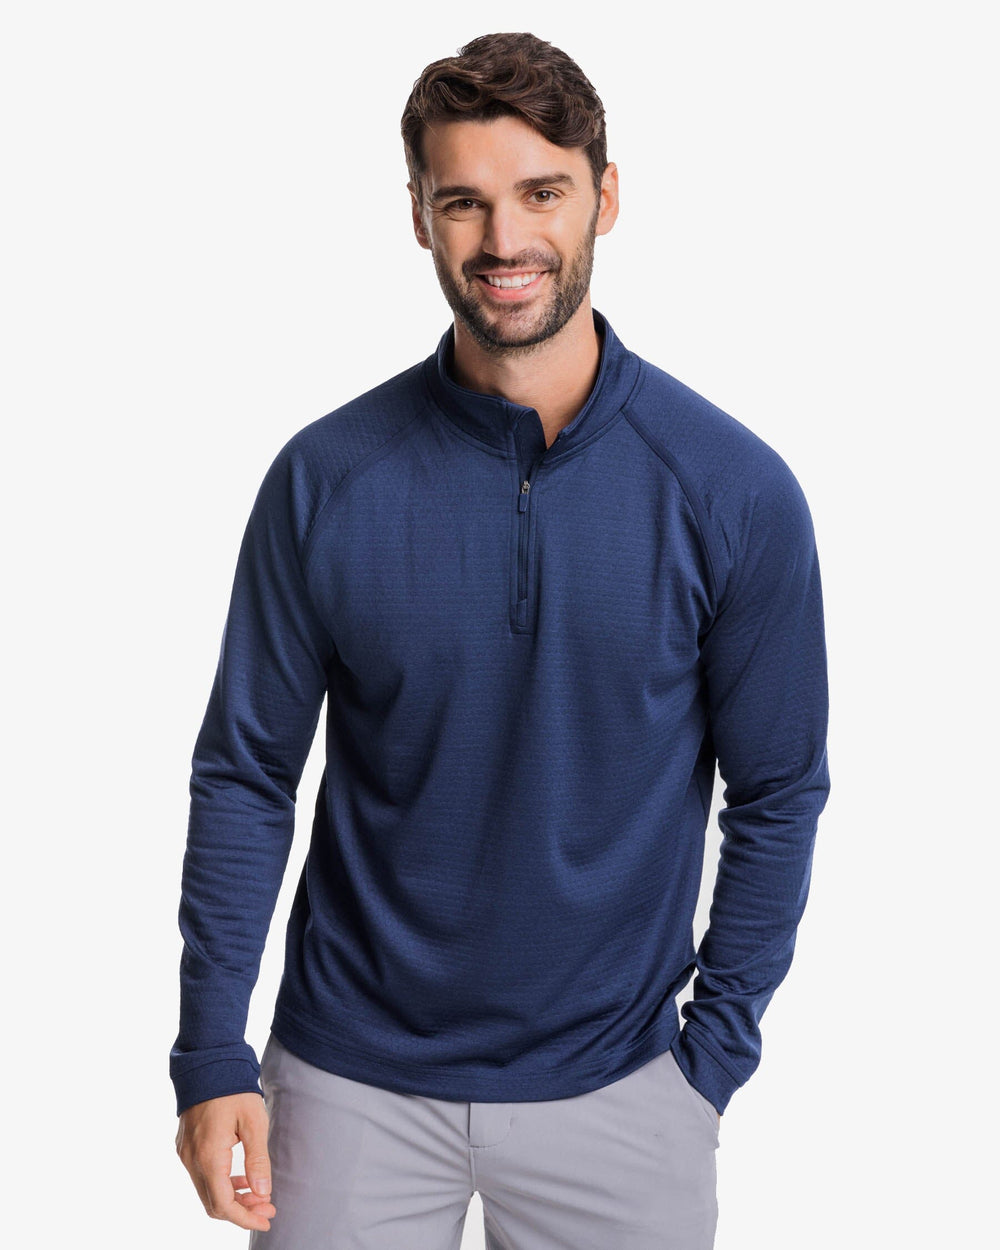 The front view of the Southern Tide Scuttle Heather Quarter Zip Pullover by Southern Tide - Heather True Navy